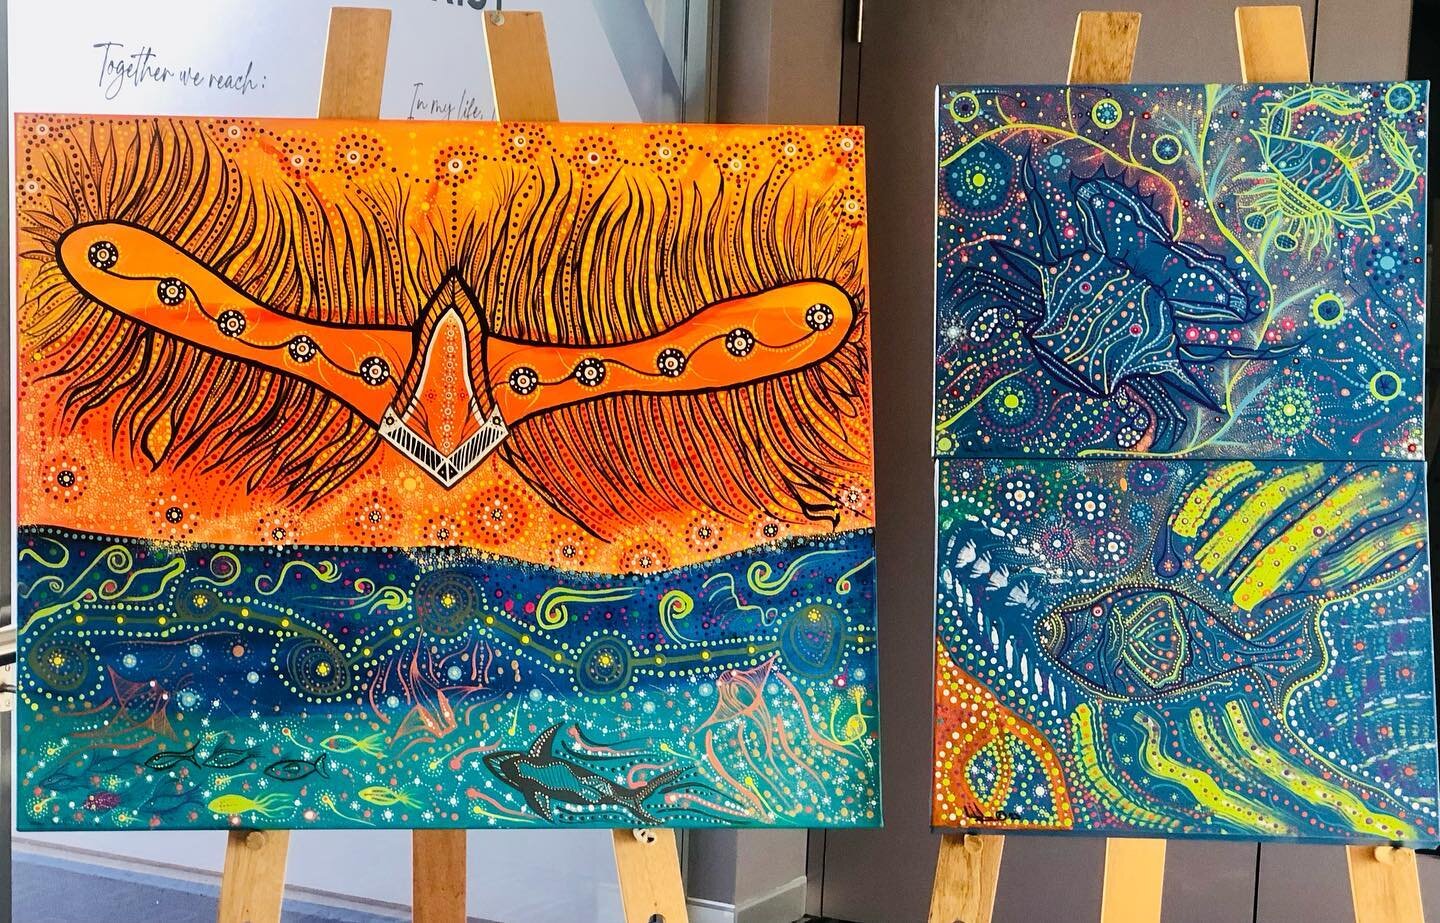 Less than two weeks to go for our fundraiser #nightunderthestars2023🌠 for the #car2homeproject. Register or bid now on these amazing artworks https://www.macquariecare.org.au/night-under-the-stars-2023